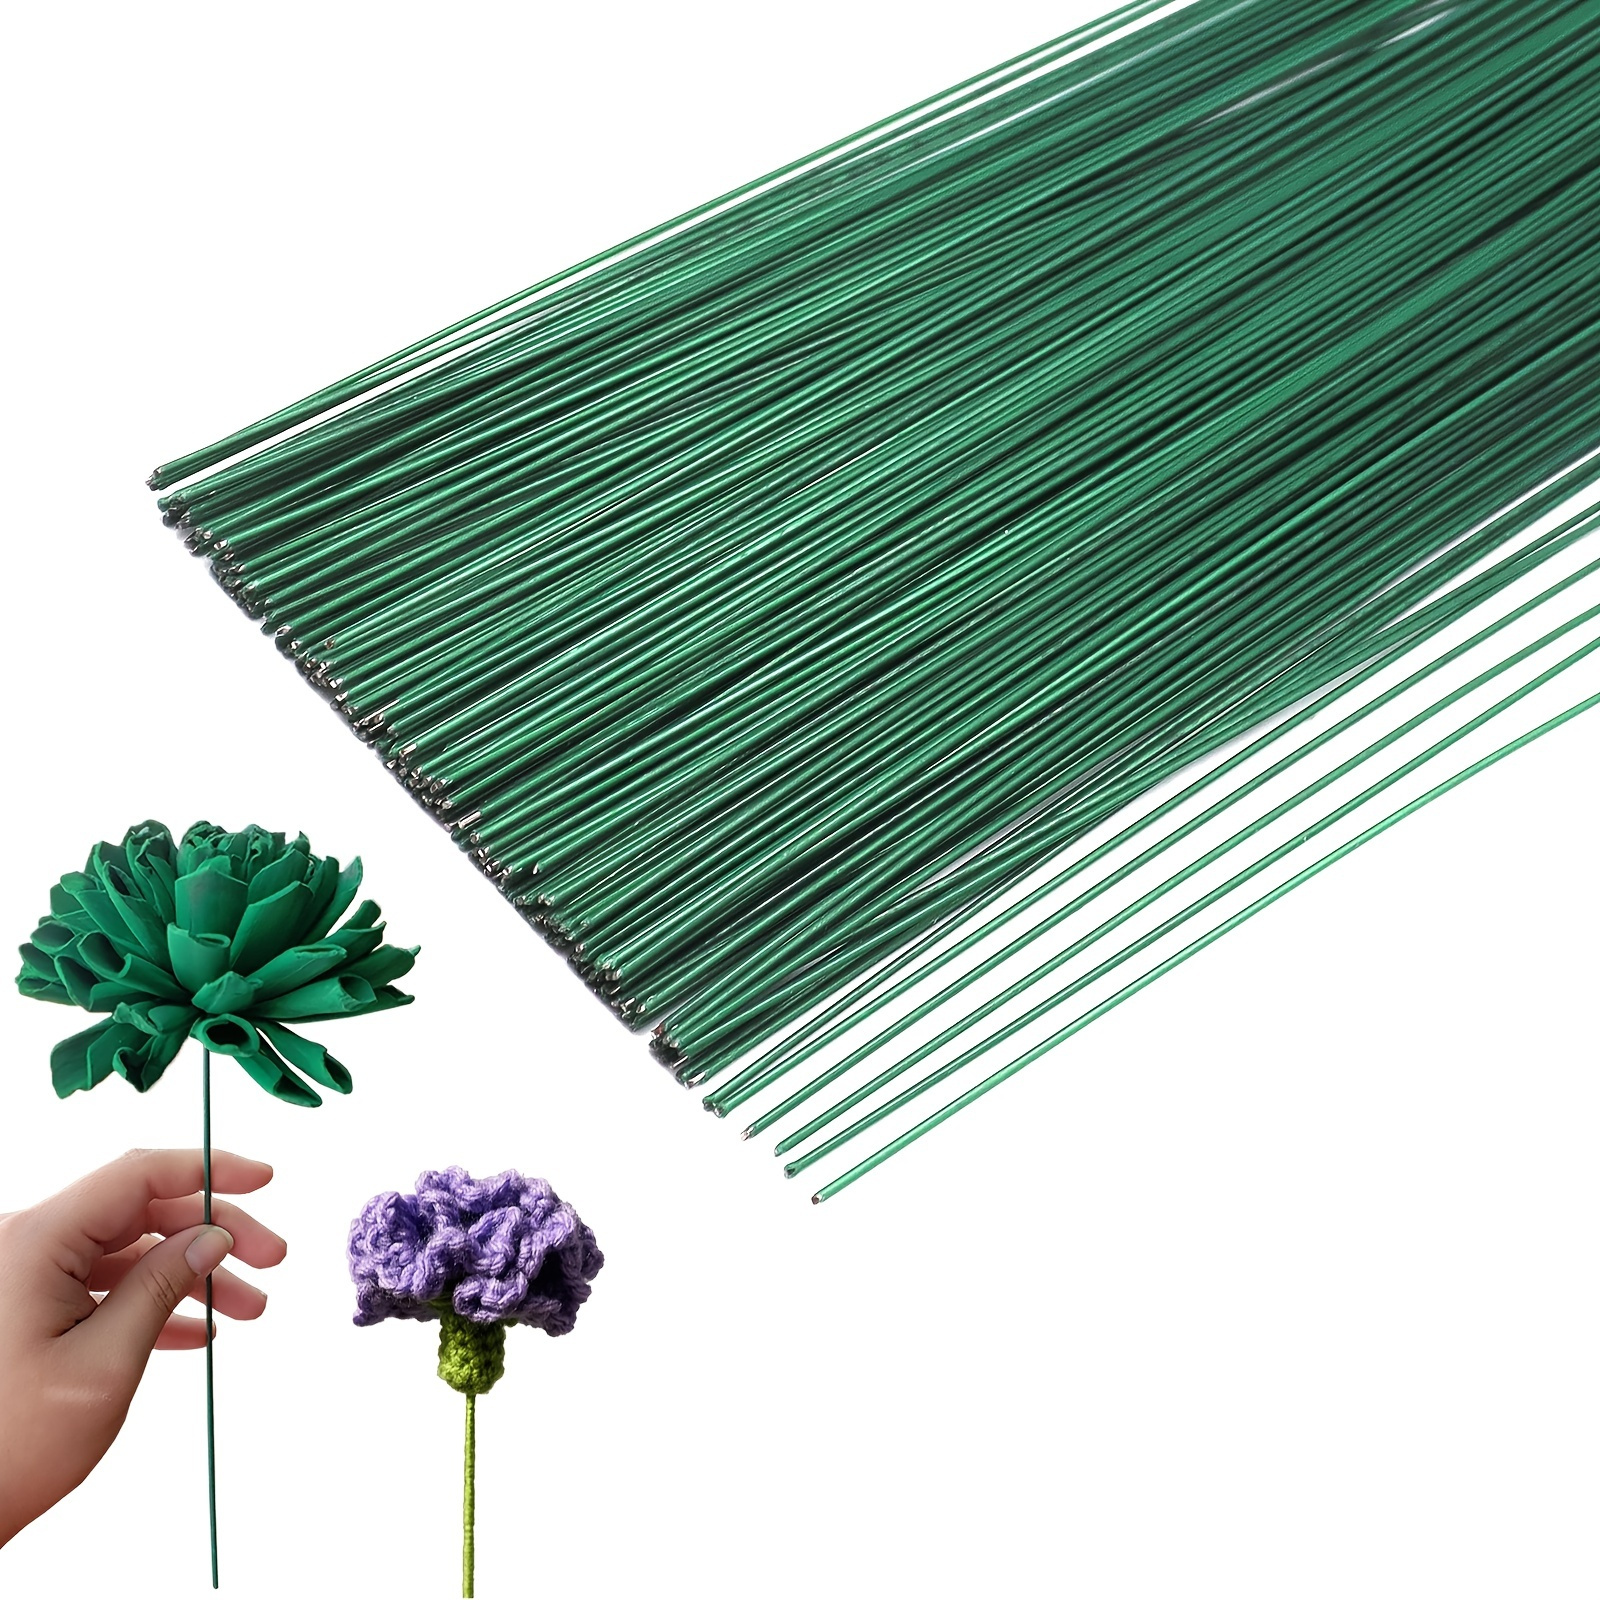 

200 Pcs Floral Flower Stem Wire, 16 Inch 22 Gauge Flower Paper Wrapped Wire, Green Crafting Floral Stem For Flower Arrangements Diy, Bouquent Stem Wrapping And Crafts, Easter Handwork